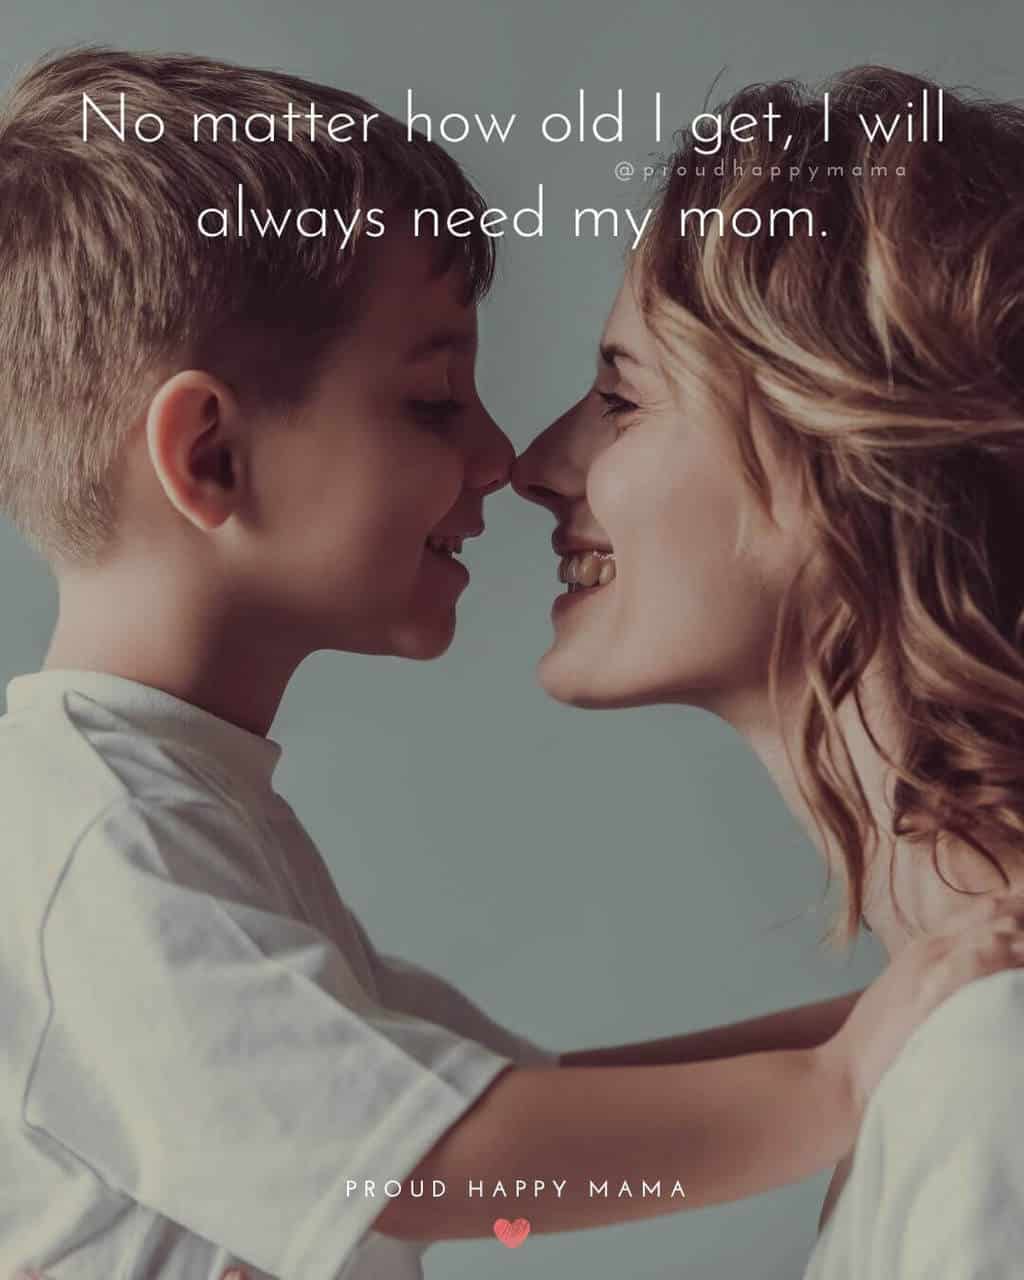 Happy Mothers Day Quotes | No matter how old I get, I will always need my mom.